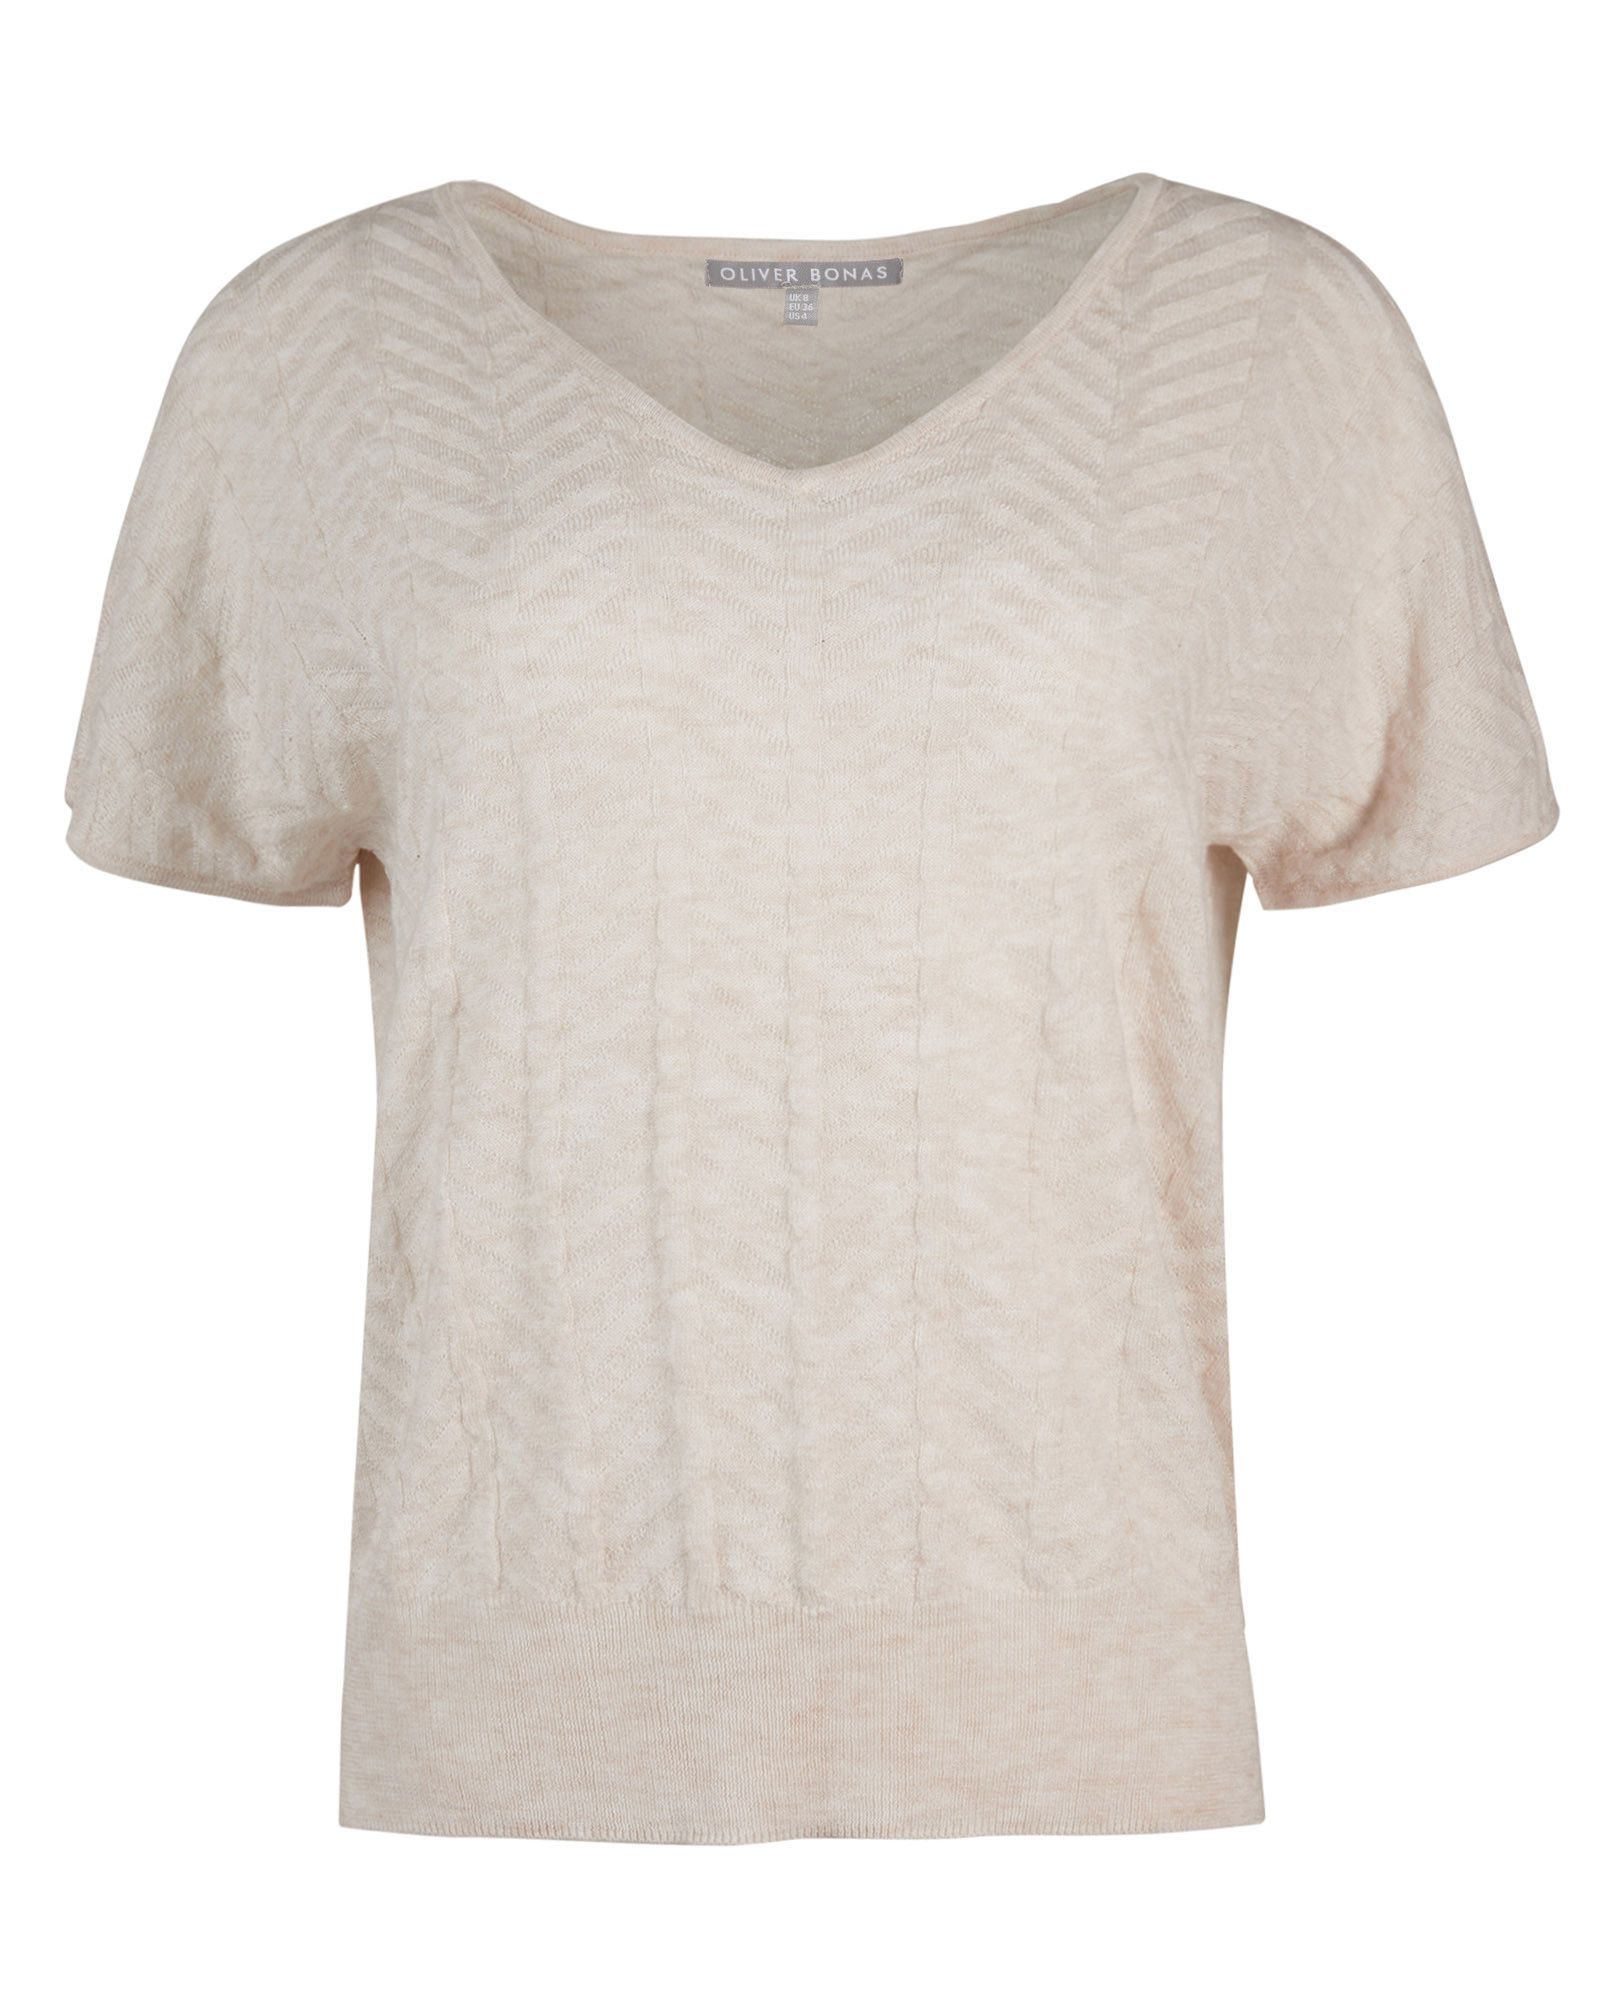 Chevron Textured Ivory Knitted Top | Oliver Bonas